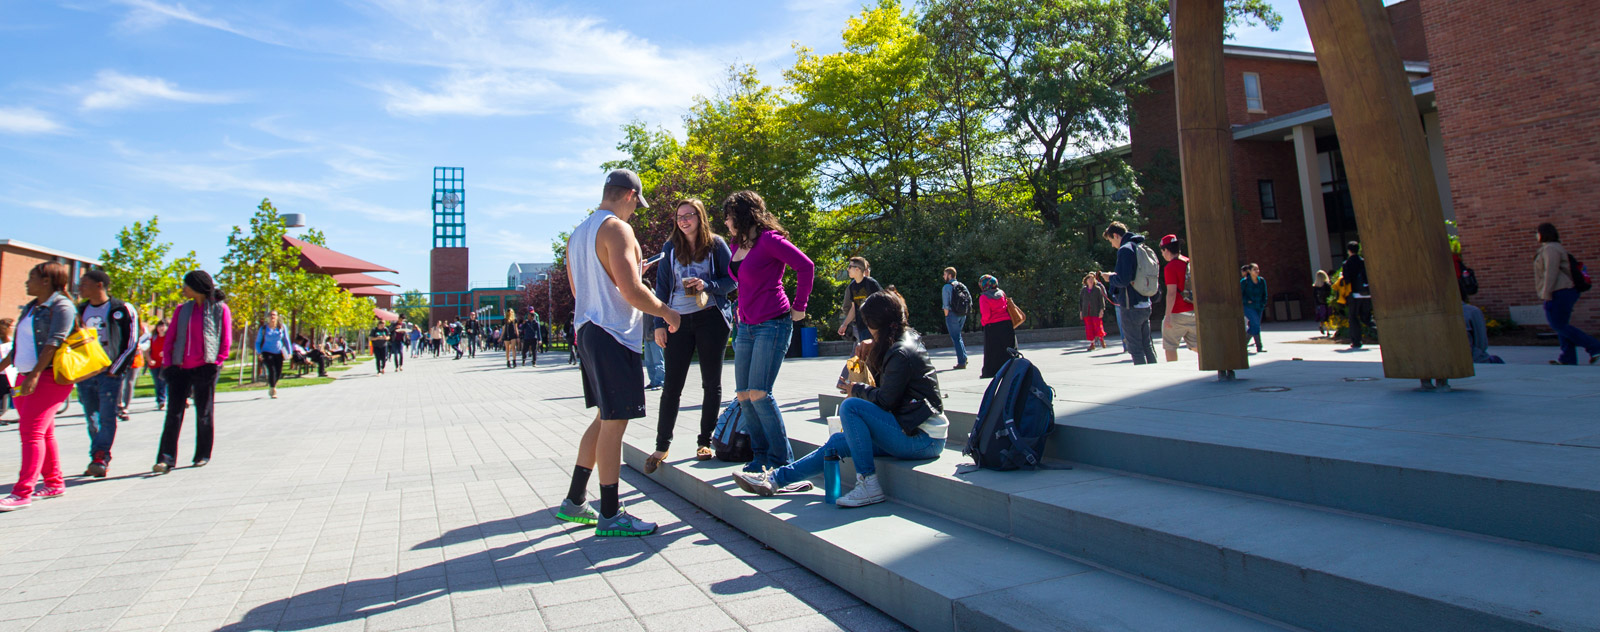 Frequently Asked Questions for First-Year Students - Undergraduate Admissions | Binghamton University